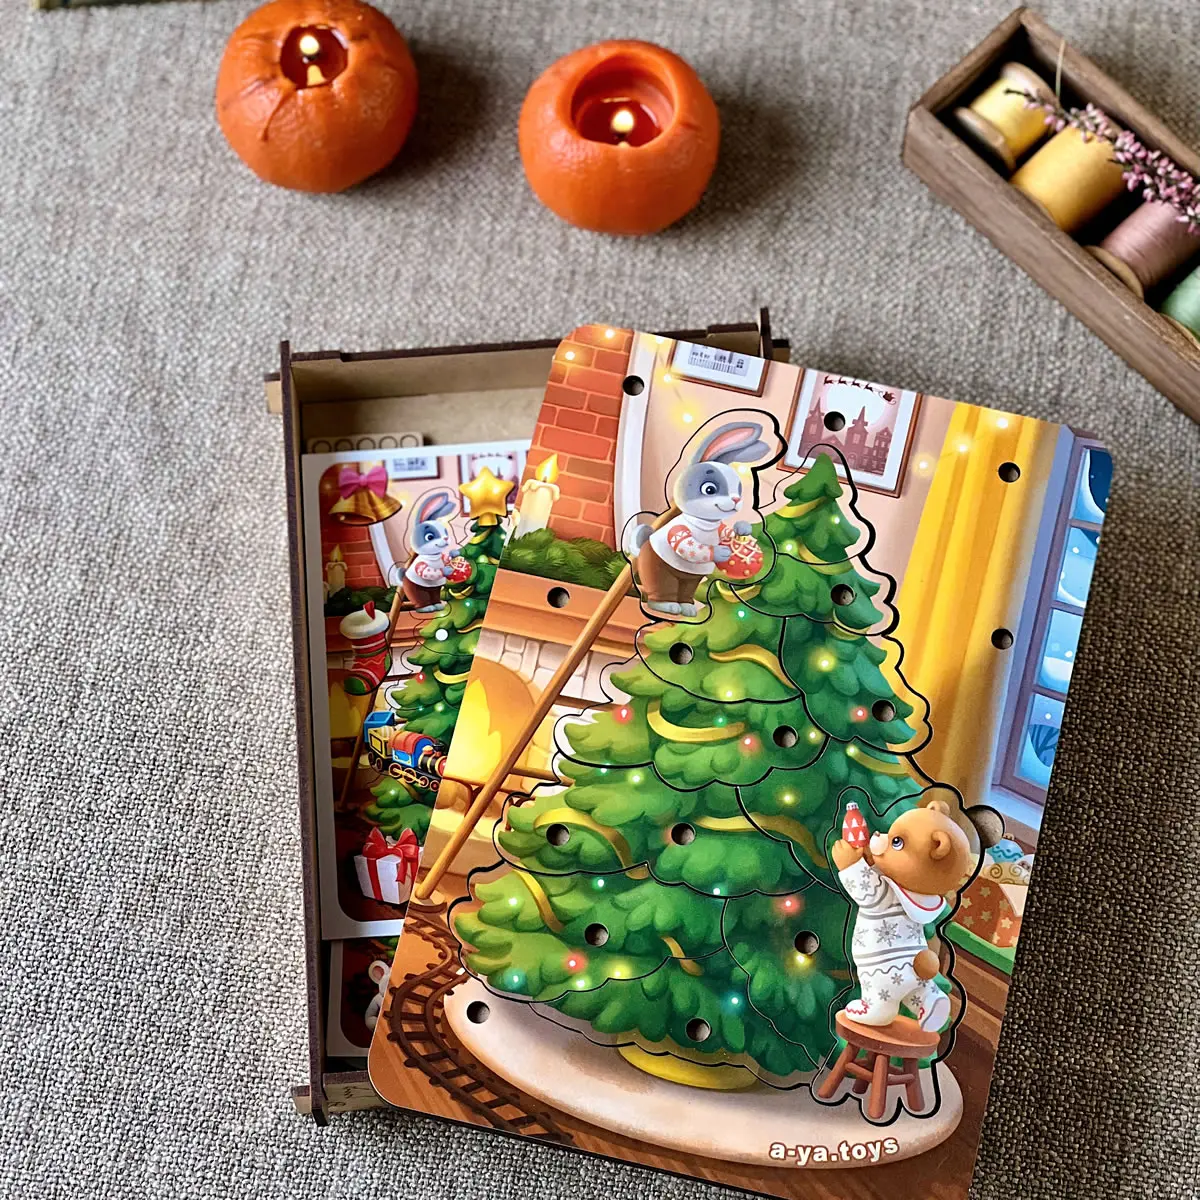 2-in-1 Game "Little Christmas tree"